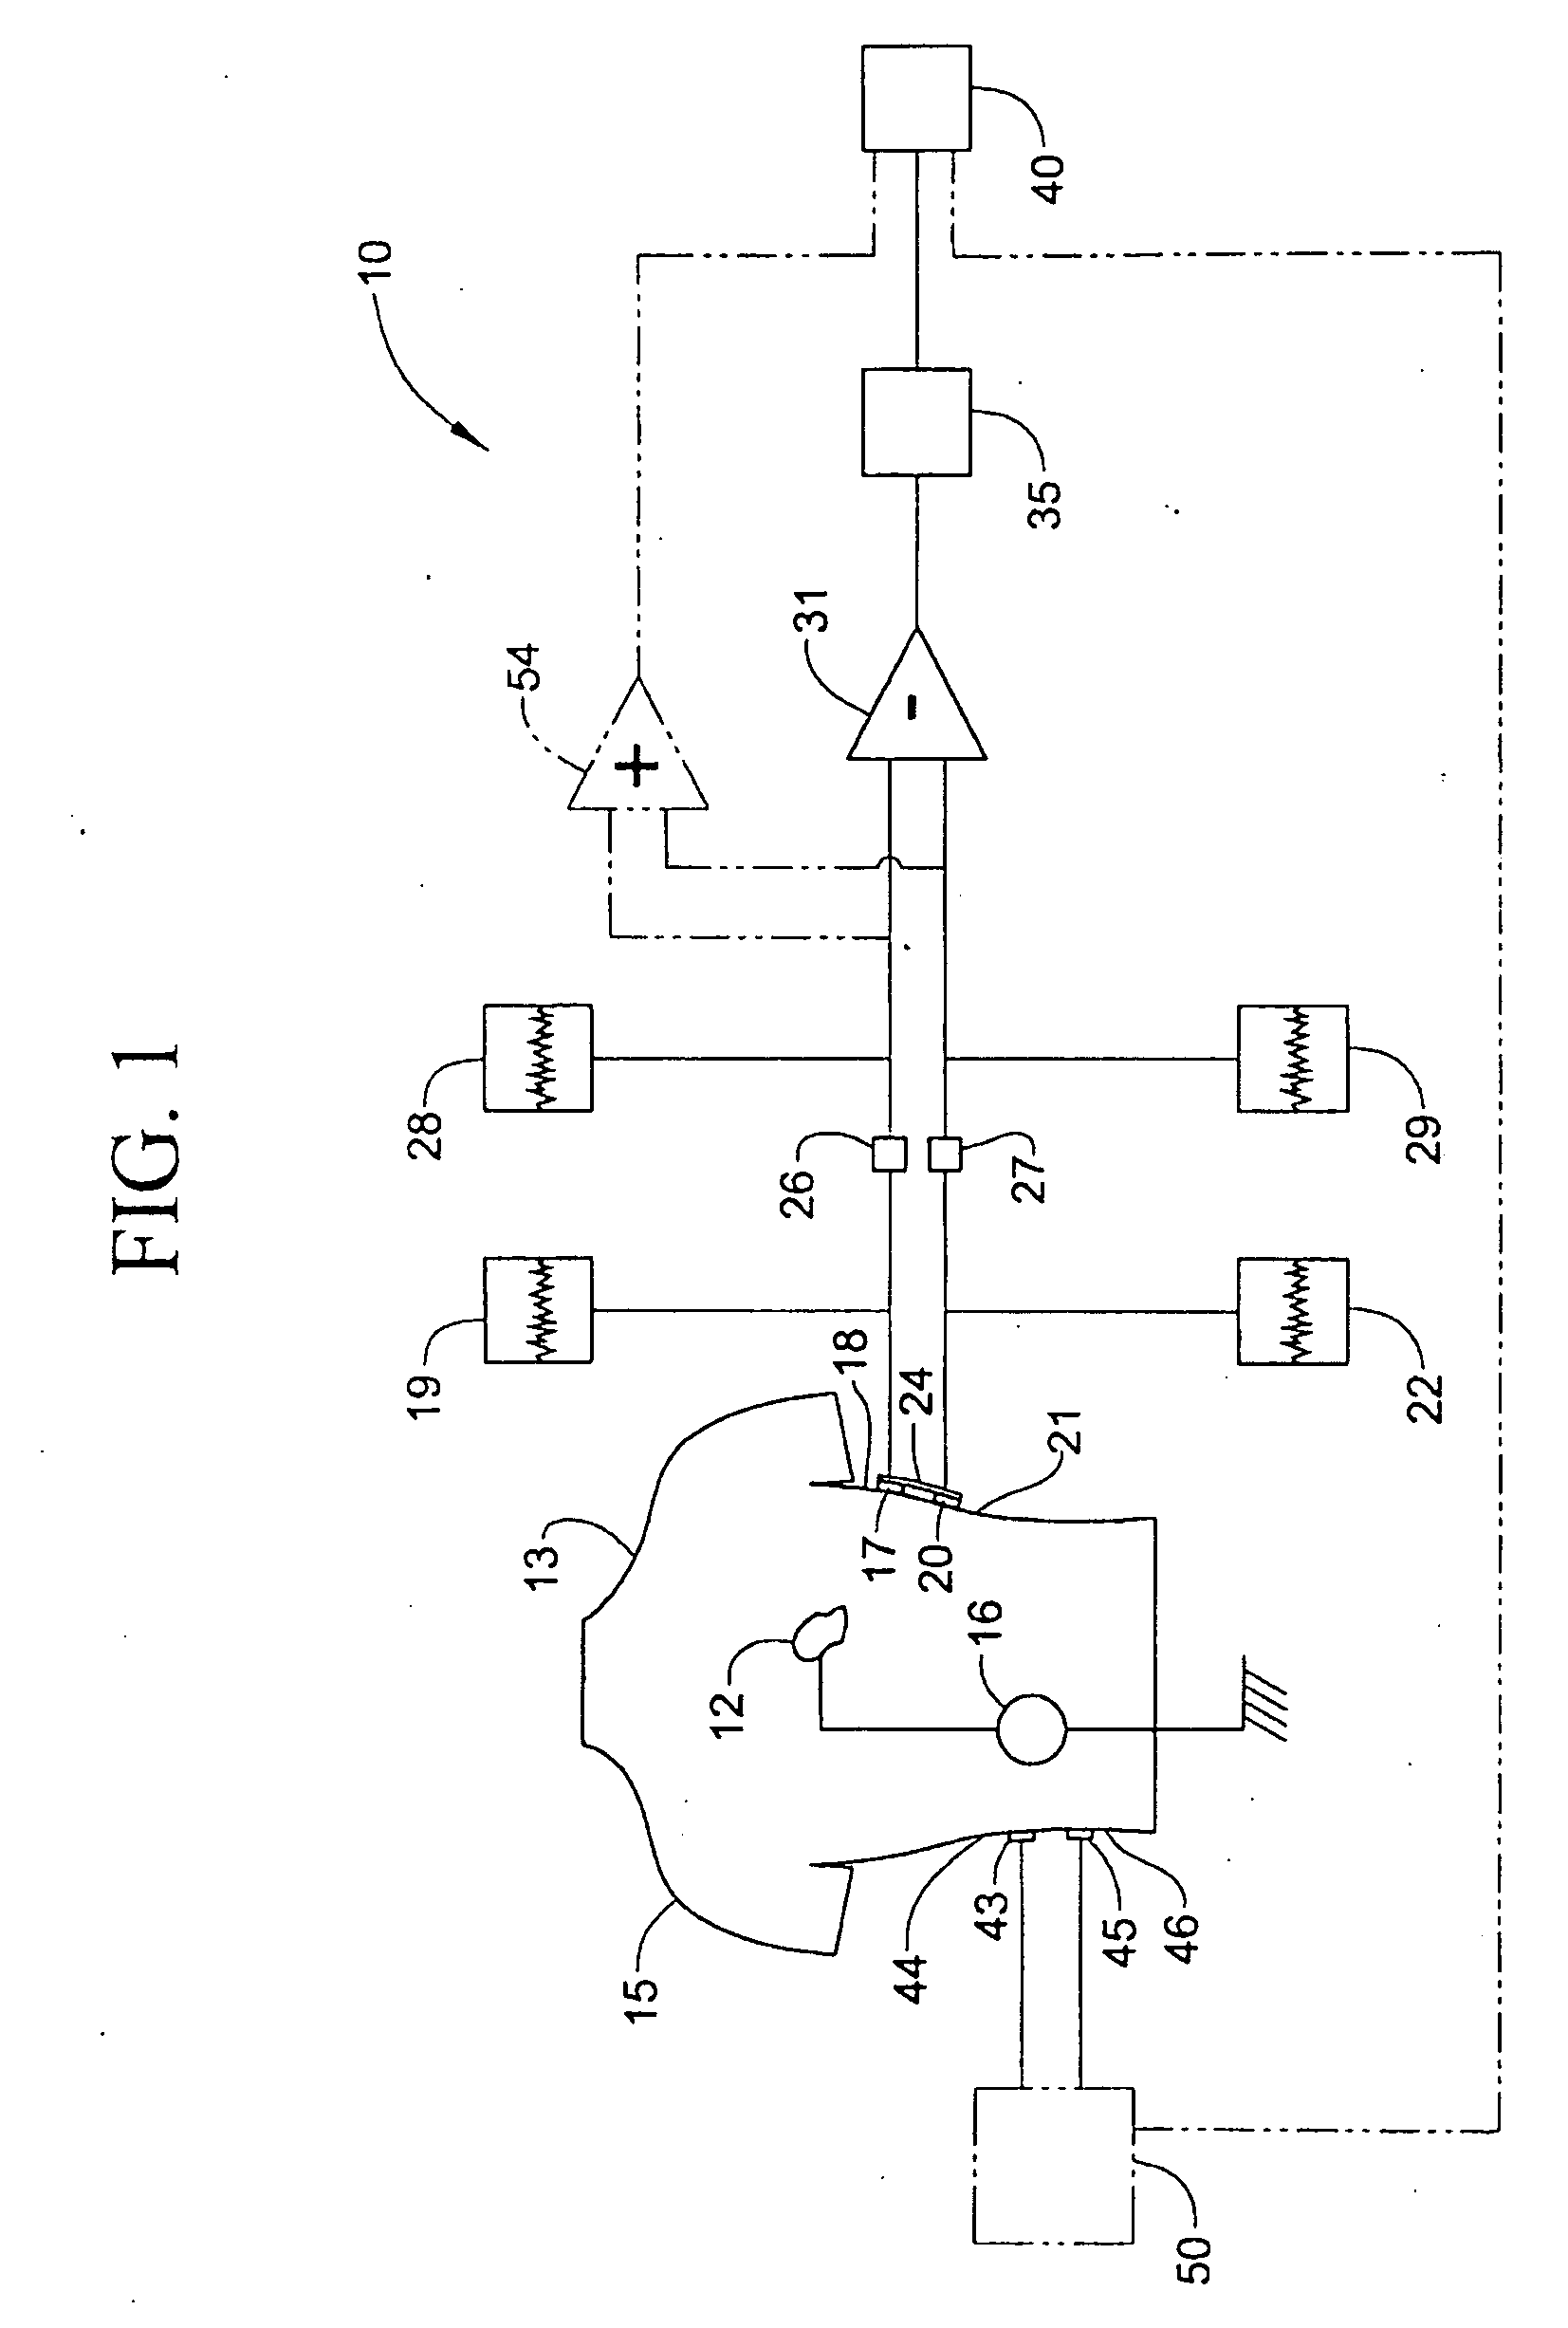 System for Measuring Electric Signals